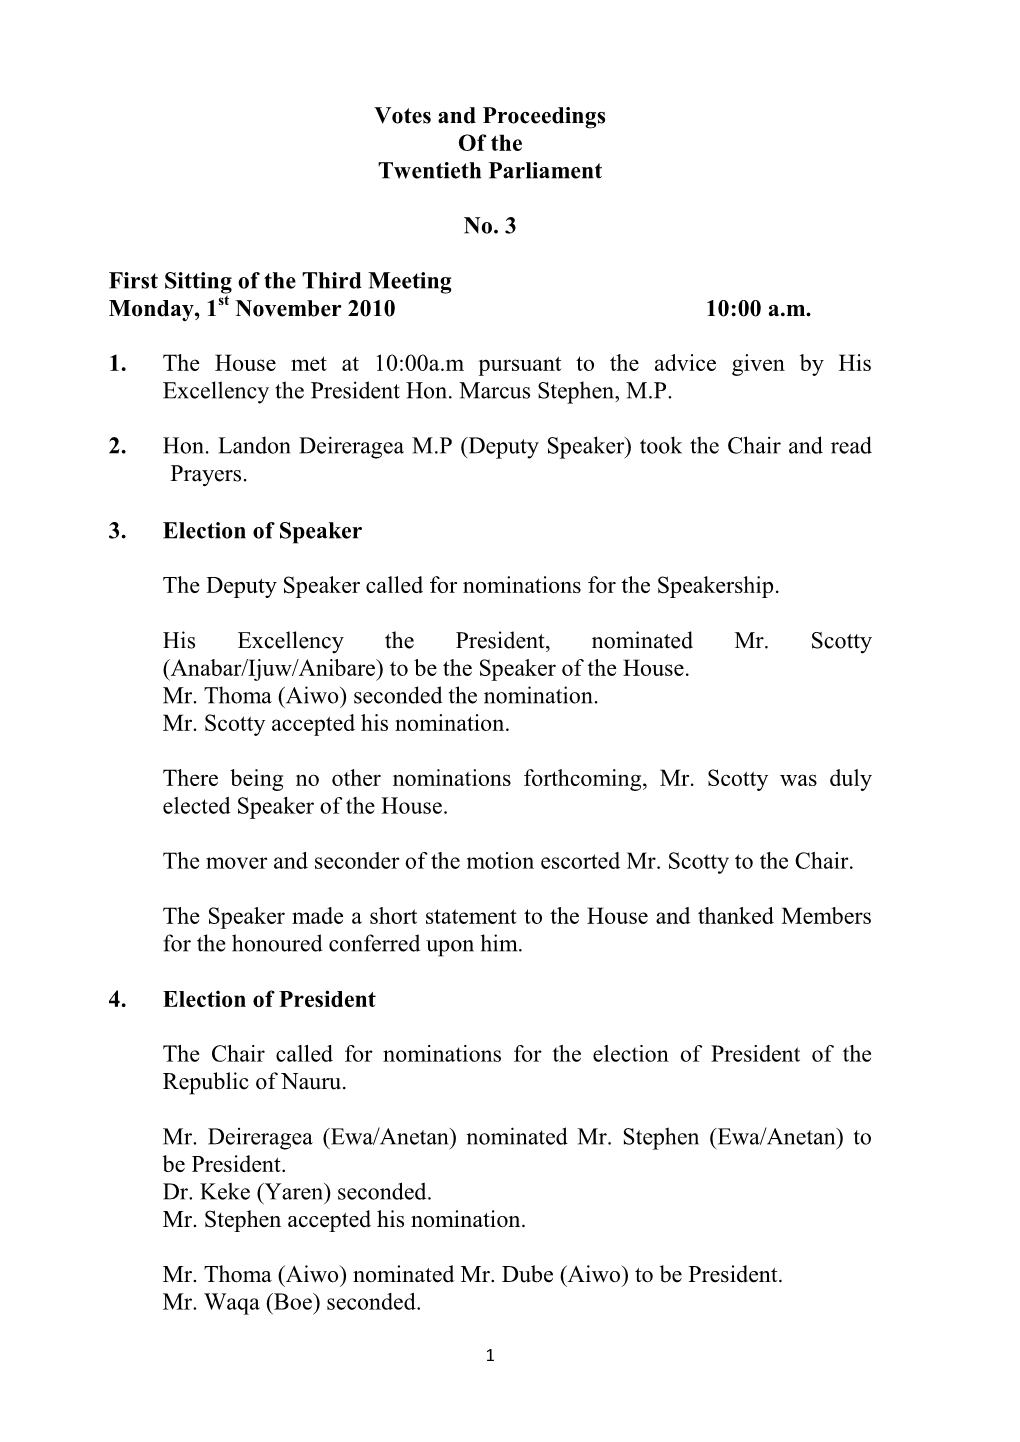 Votes and Proceedings of the Twentieth Parliament No. 3 First Sitting of the Third Meeting Monday, 1 November 2010 10:00 A.M. 1